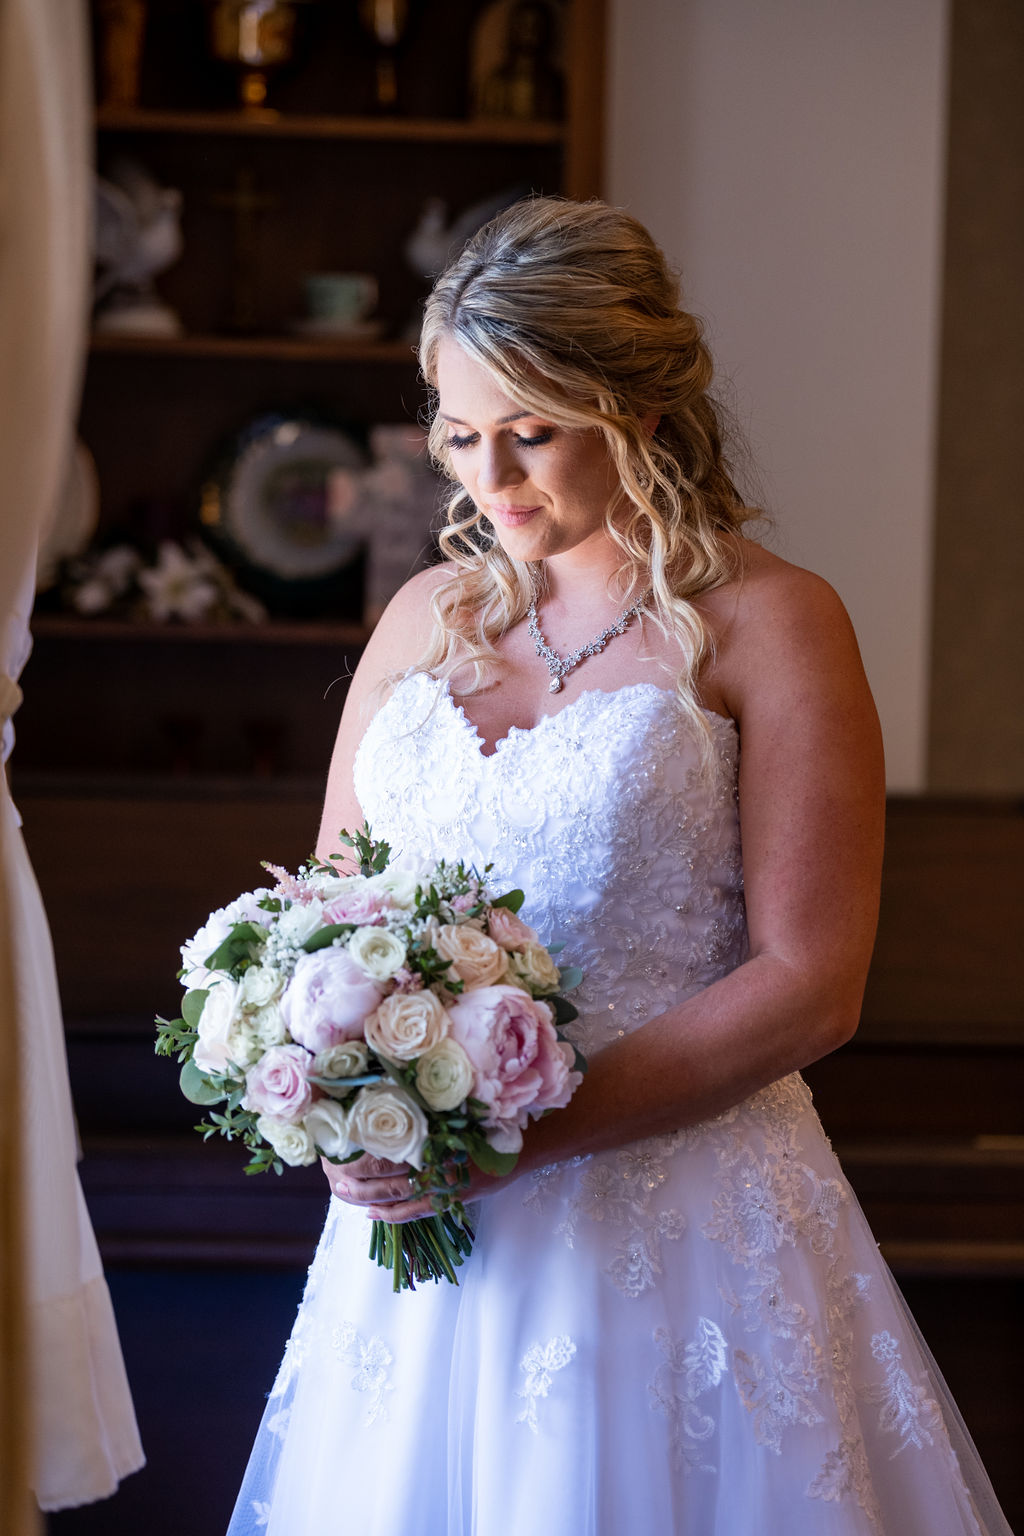 Bride smiles down at her bouquet | tips for choosing a getting ready space